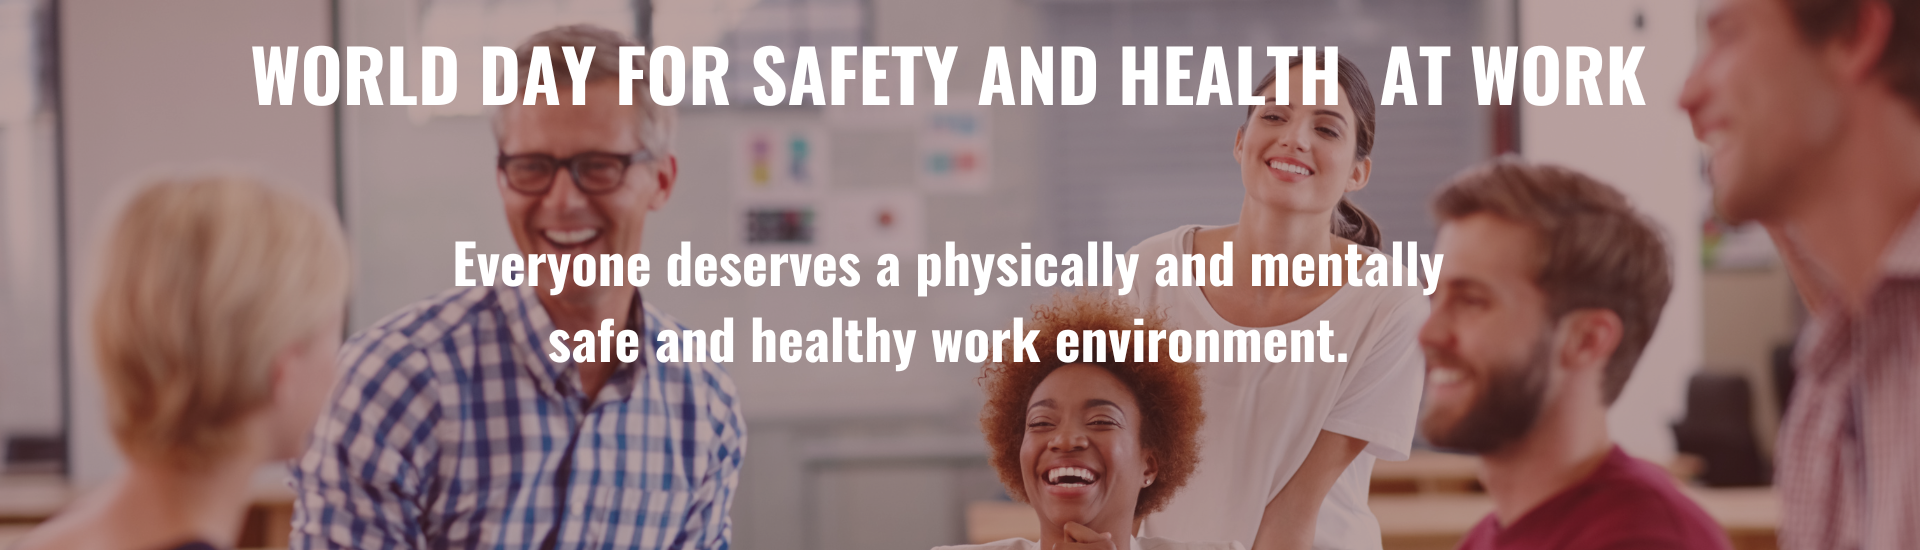 Safety and Health Week